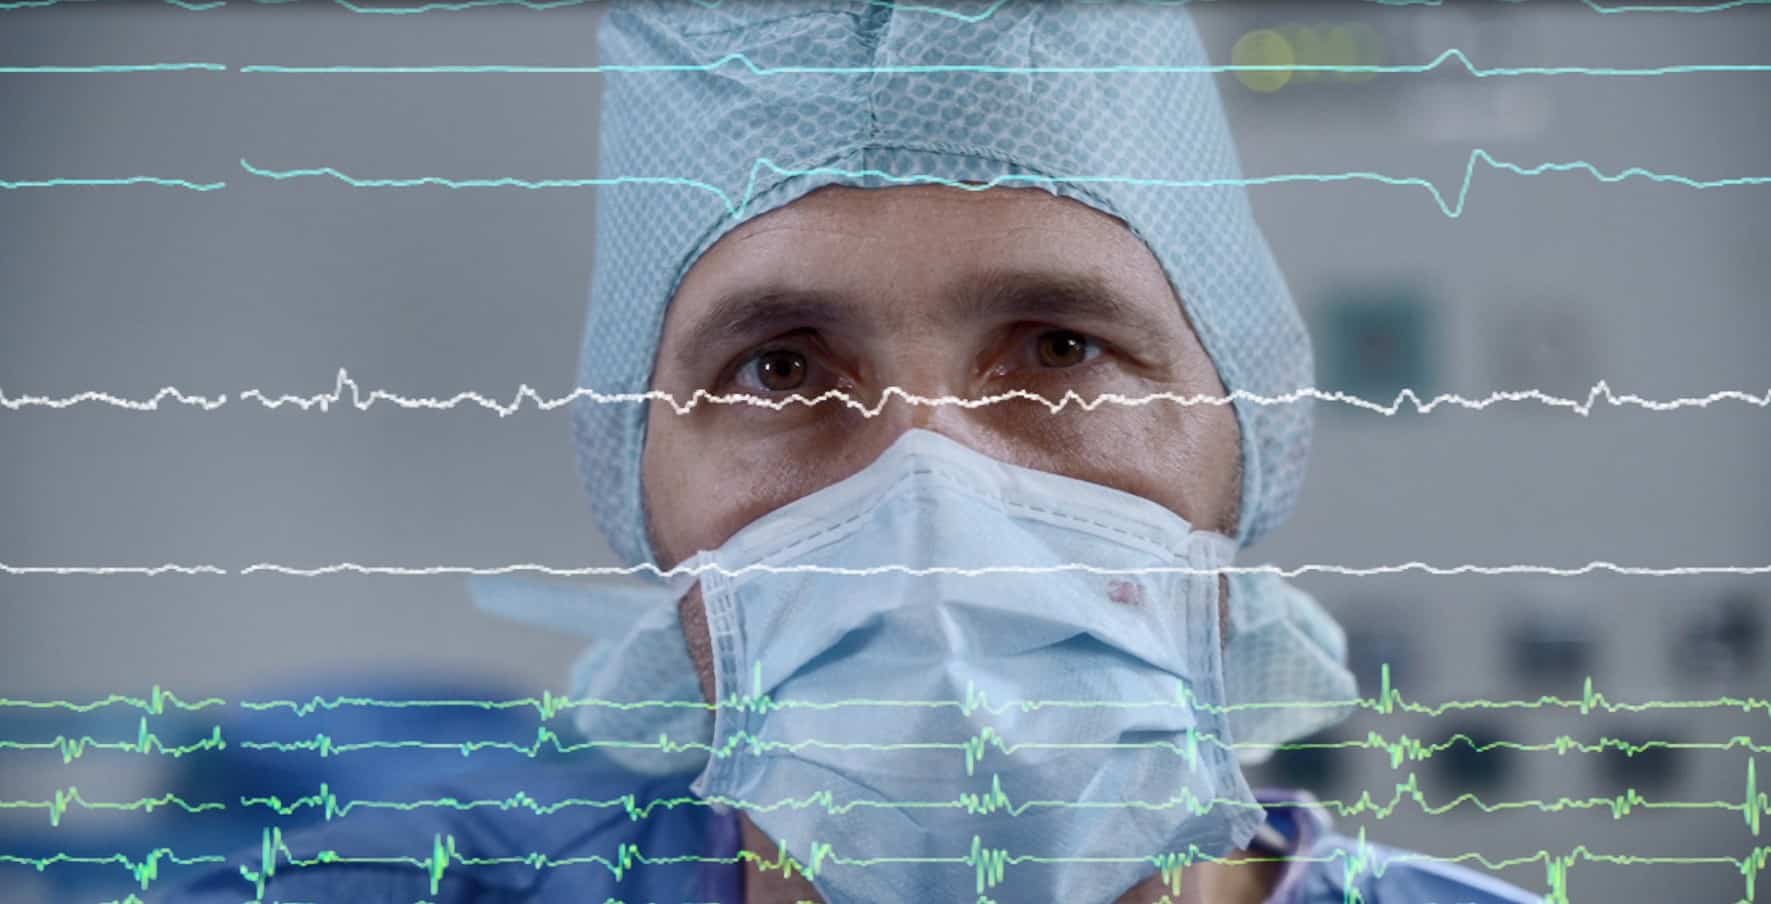 Volta Medical raises €23 million for its AI in cardiology